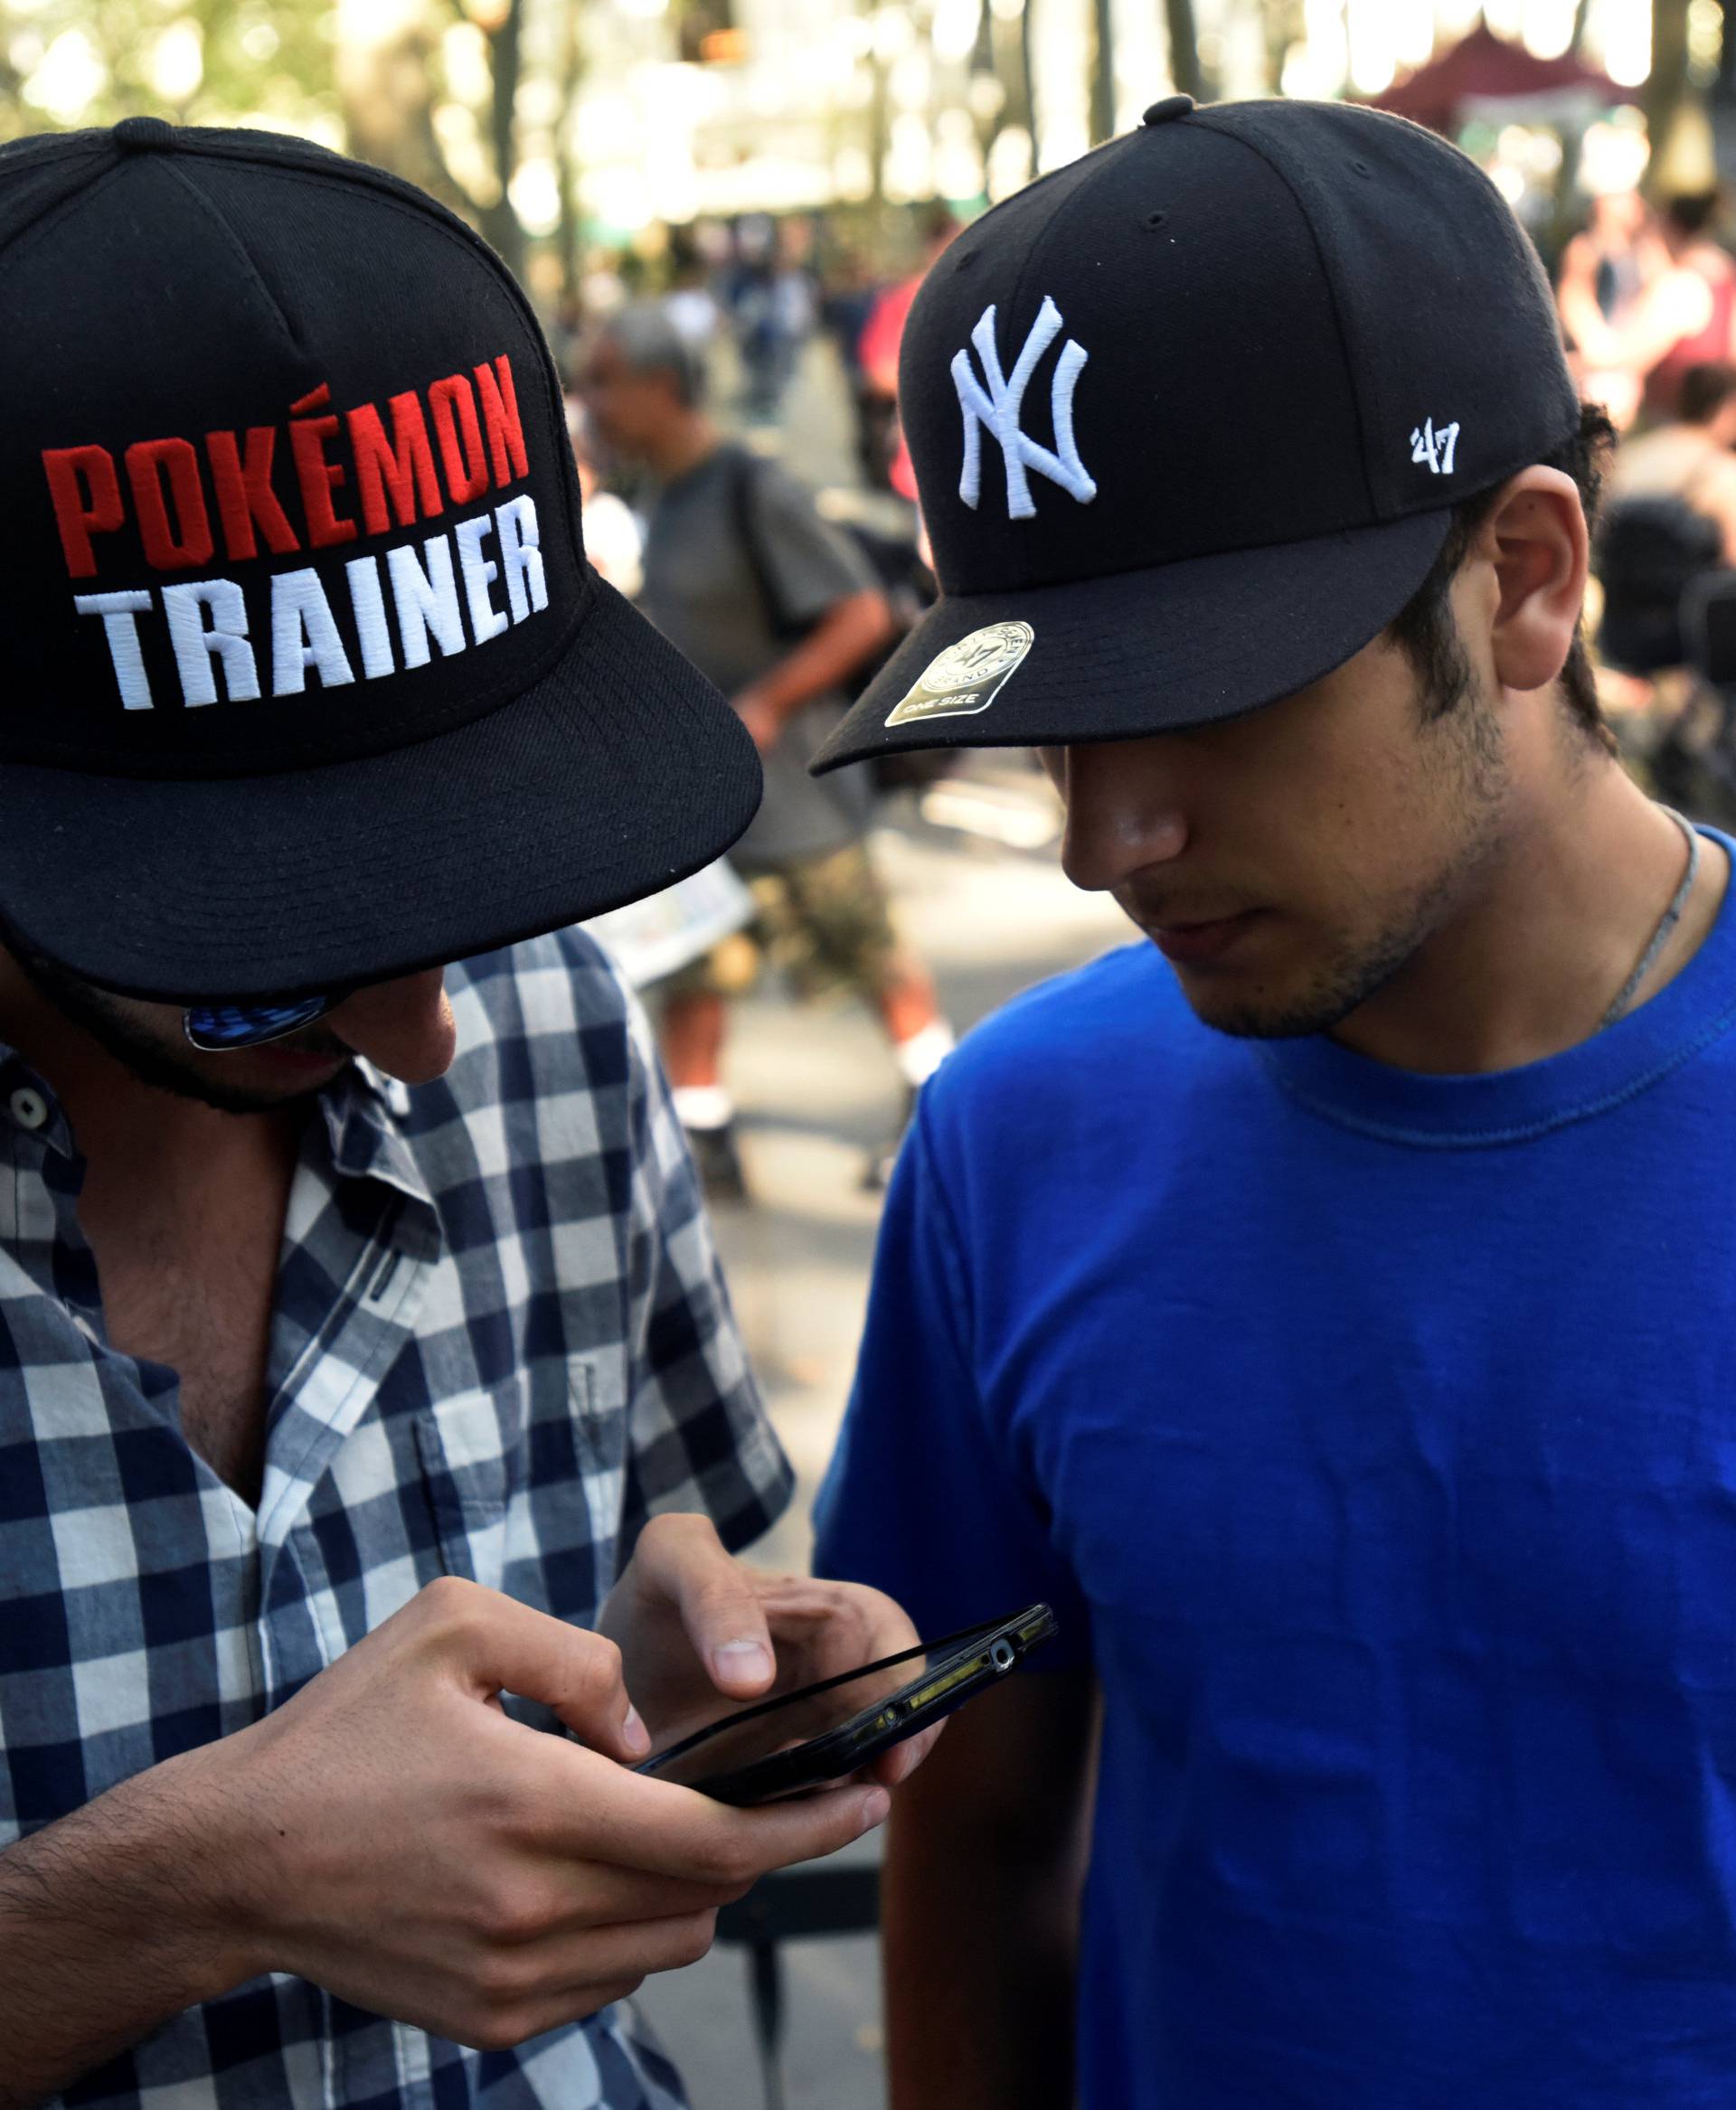 A man wears a Pokemon-themed hat as he plays the augmented reality mobile game "Pokemon Go" by Nintendo in Bryant Park, New York City